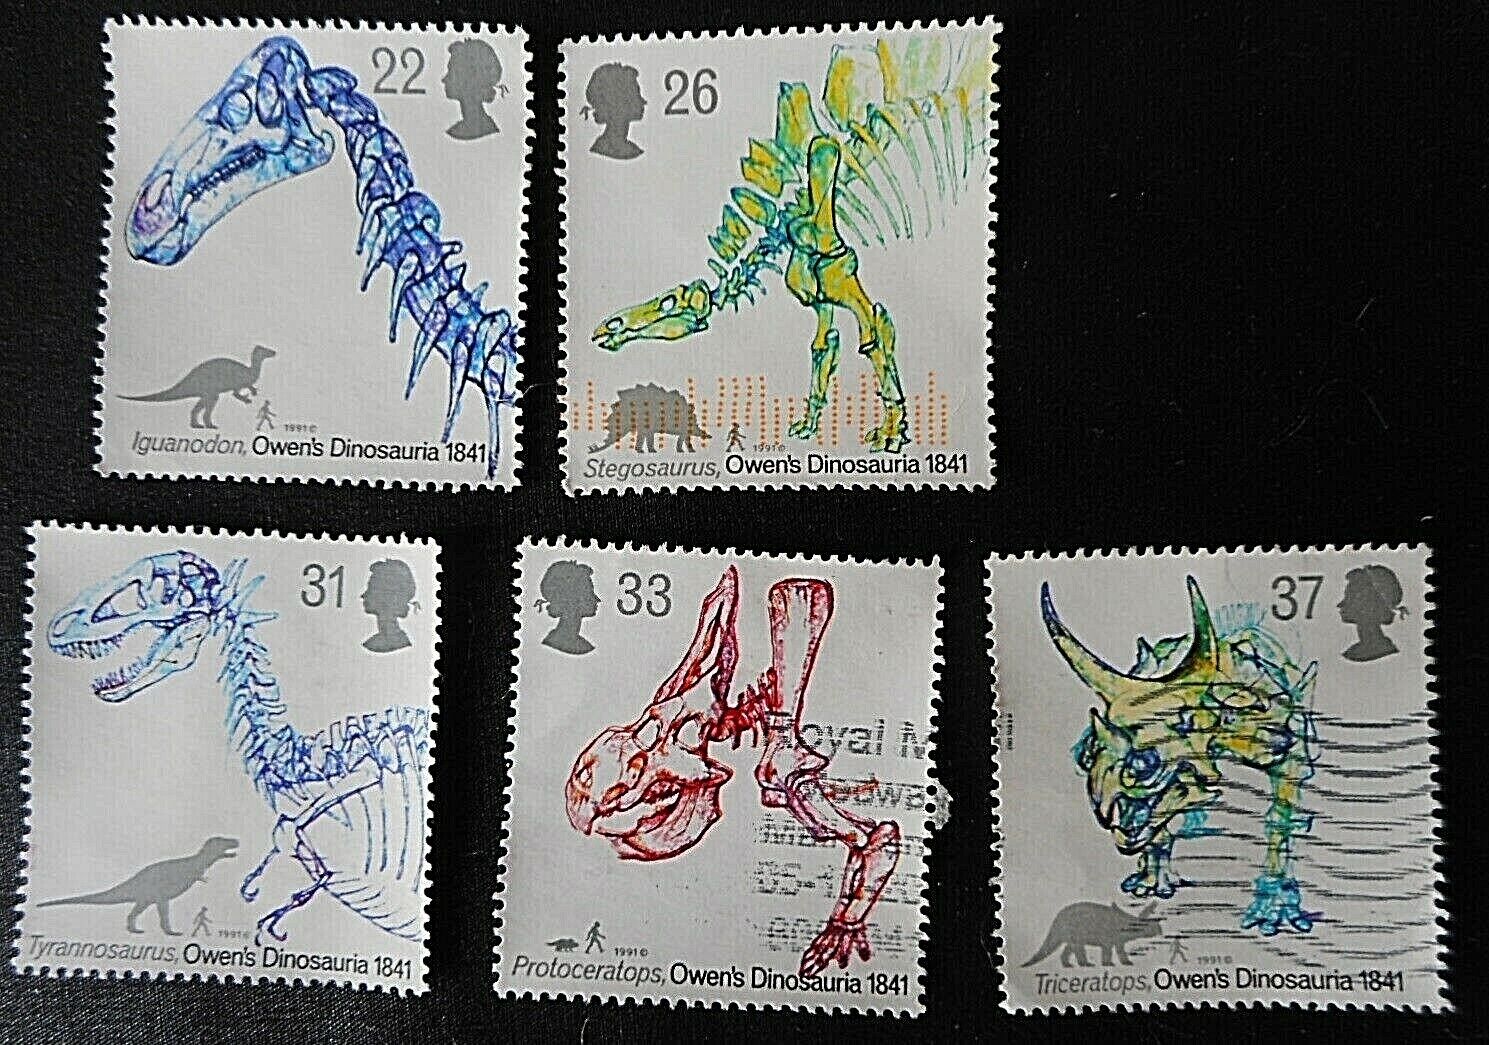 Great Britain 1991 0wen's Dinosauria used set of 5 stamps Без бренда